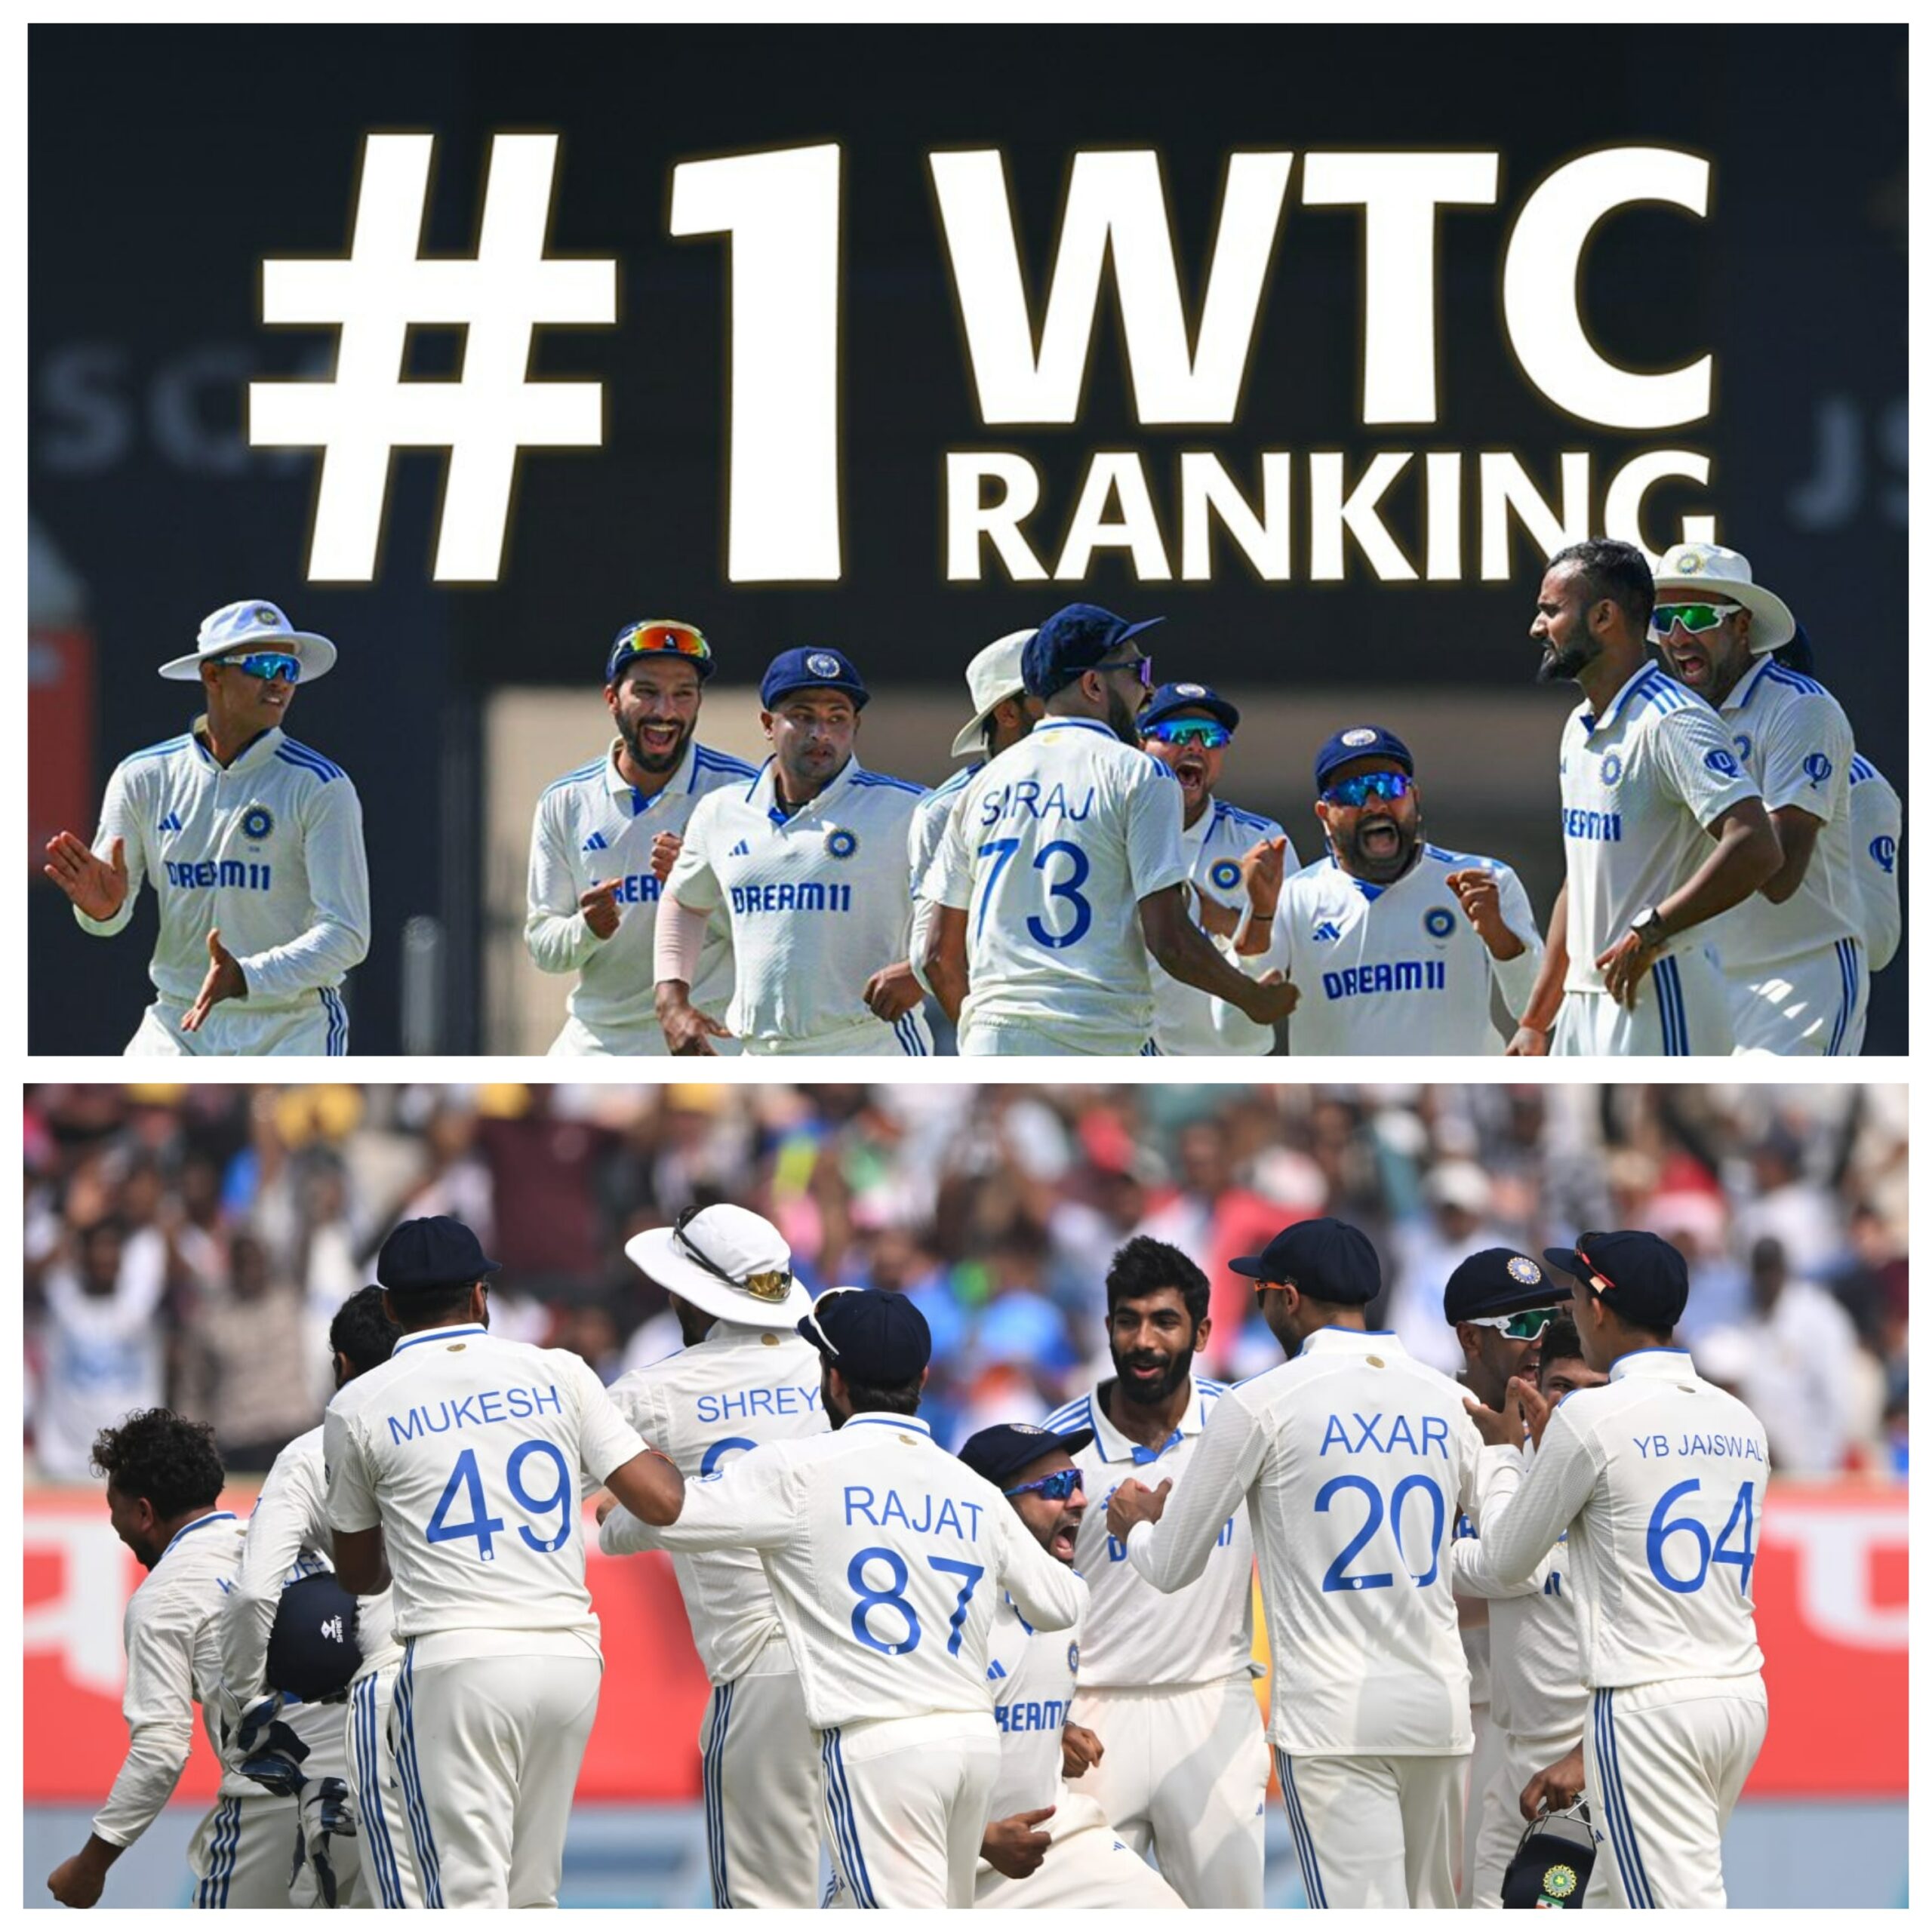 India leads the WTC points table after Australia beat New Zealand in the first Test.